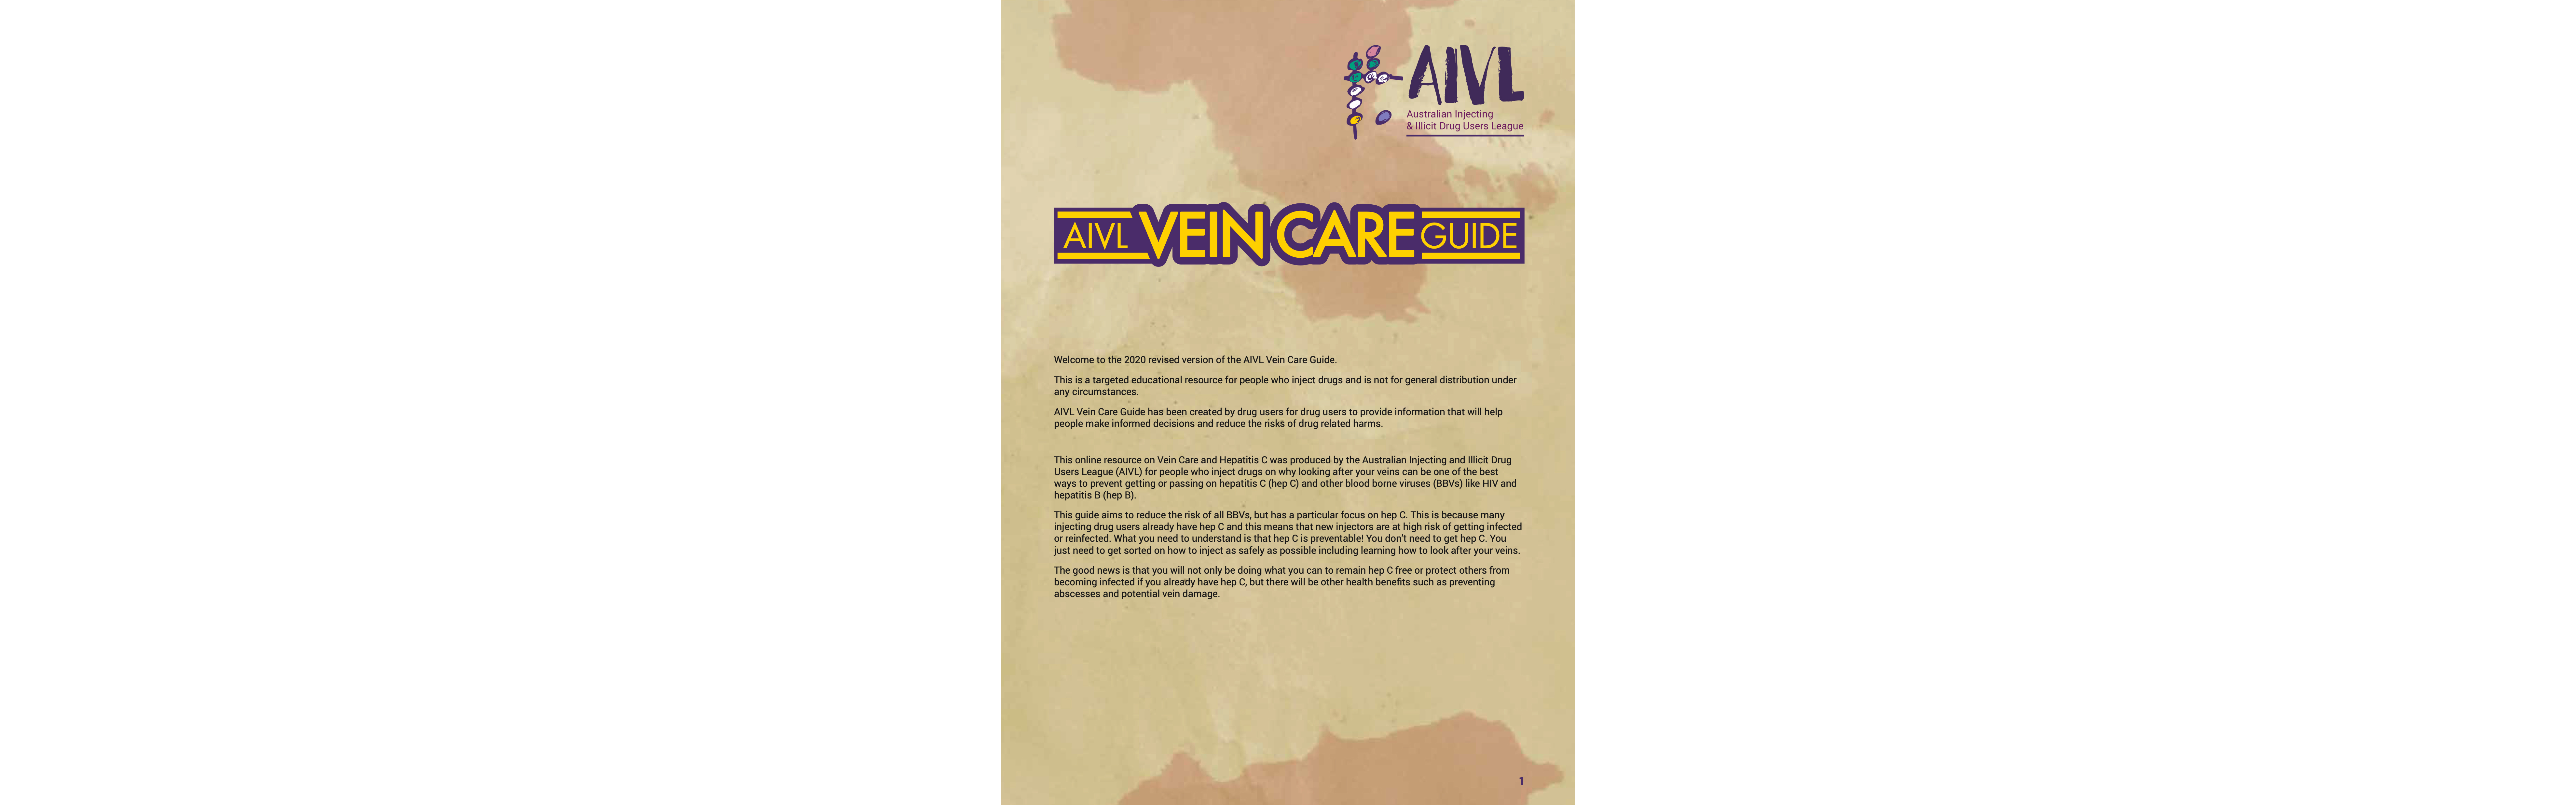 Featured image for “Vein Care Guide”